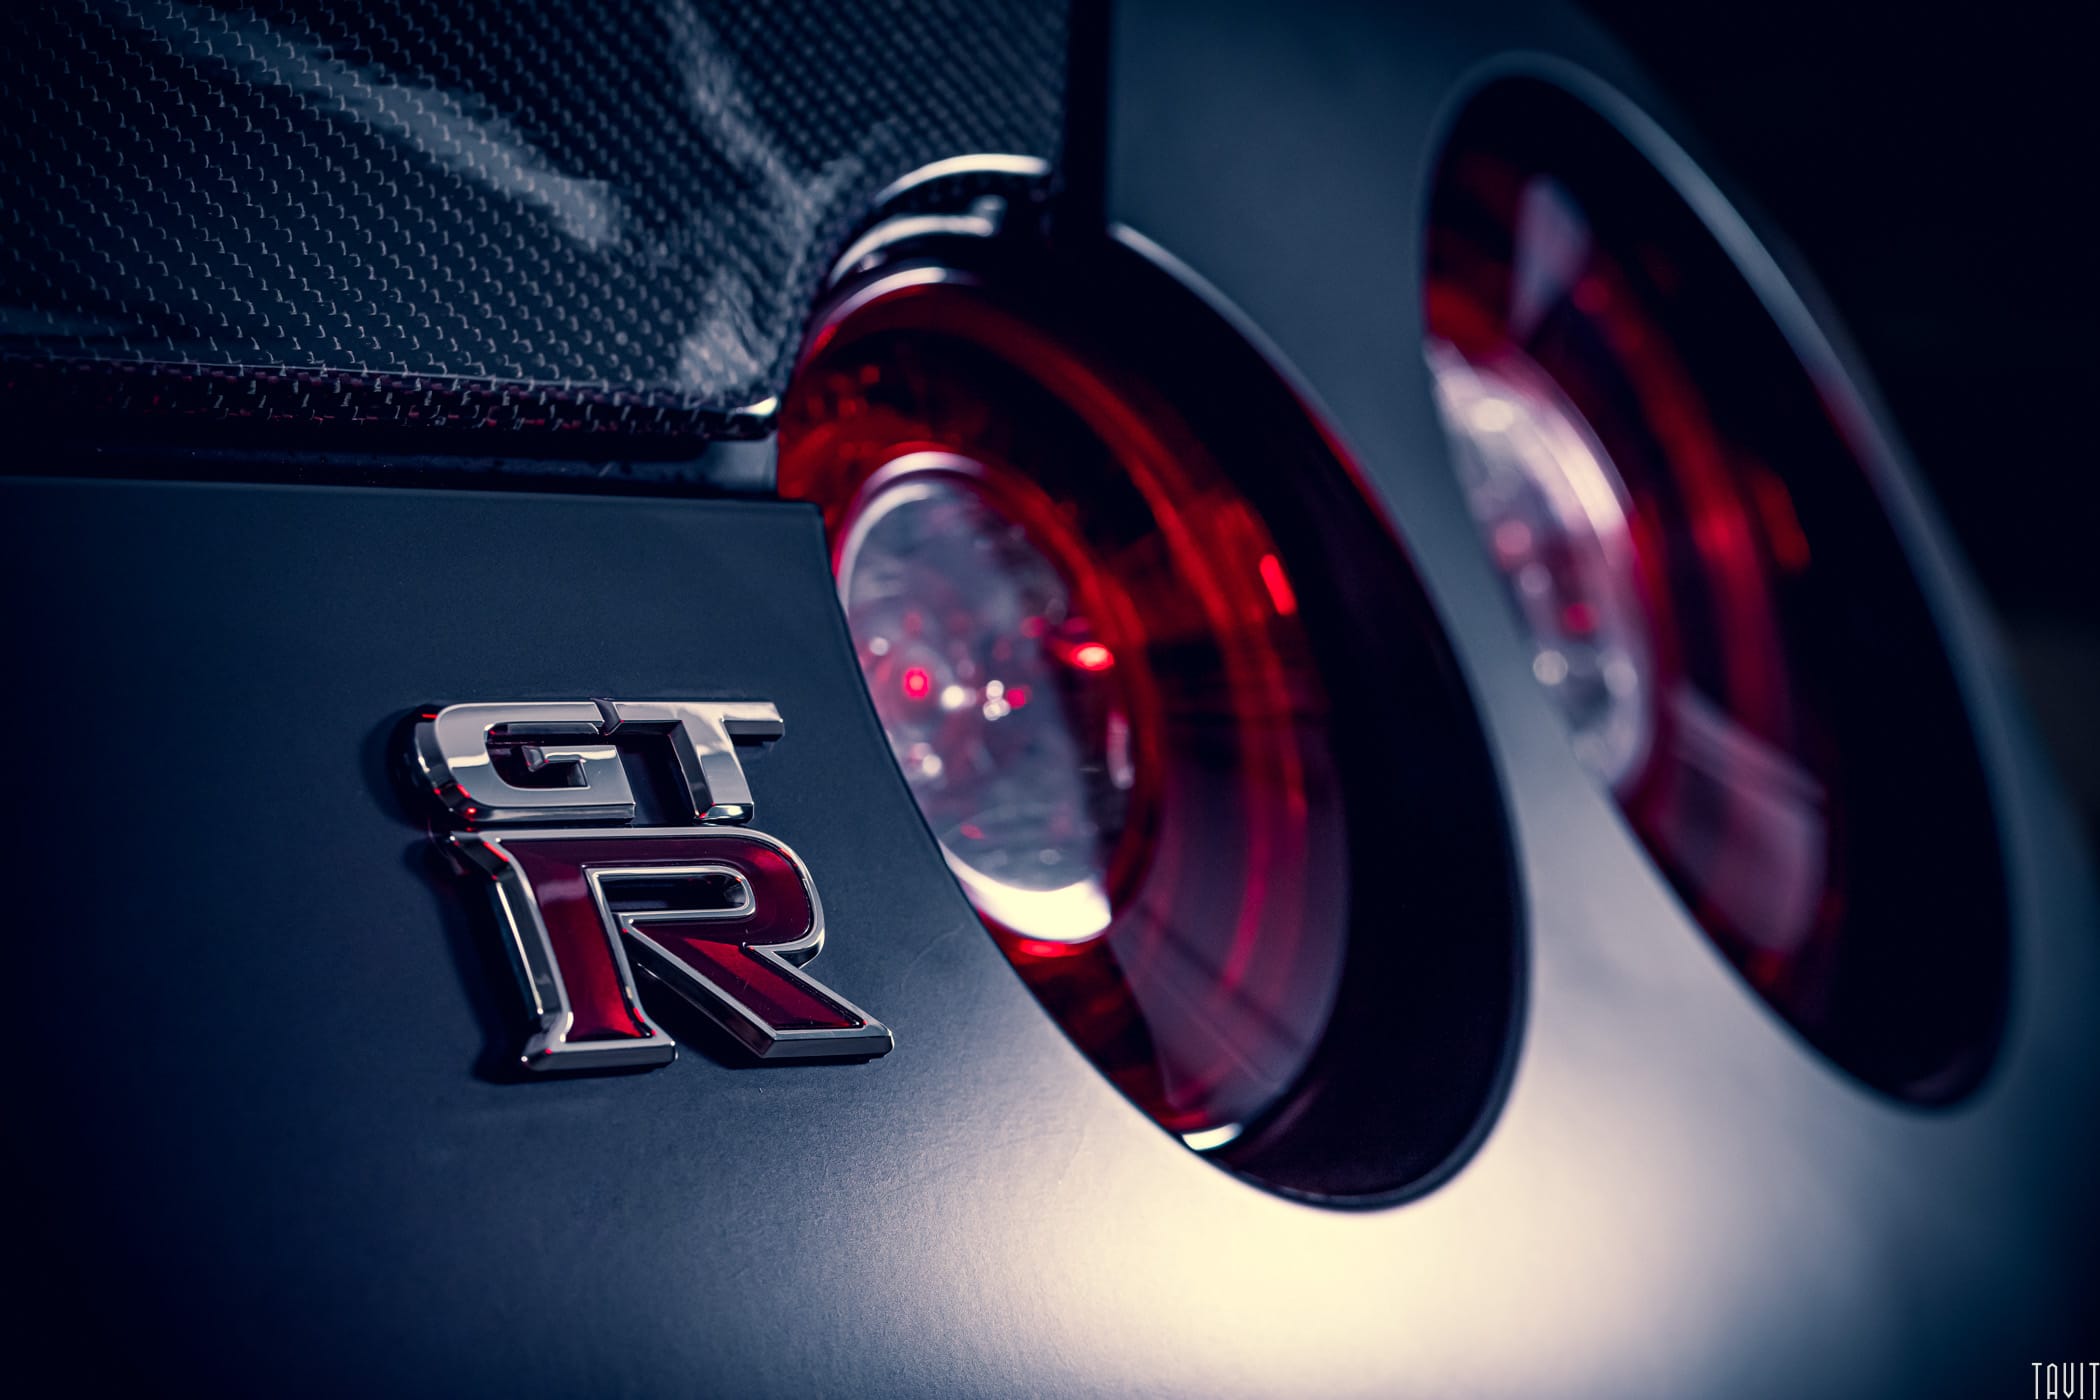 GTR badge with taillights